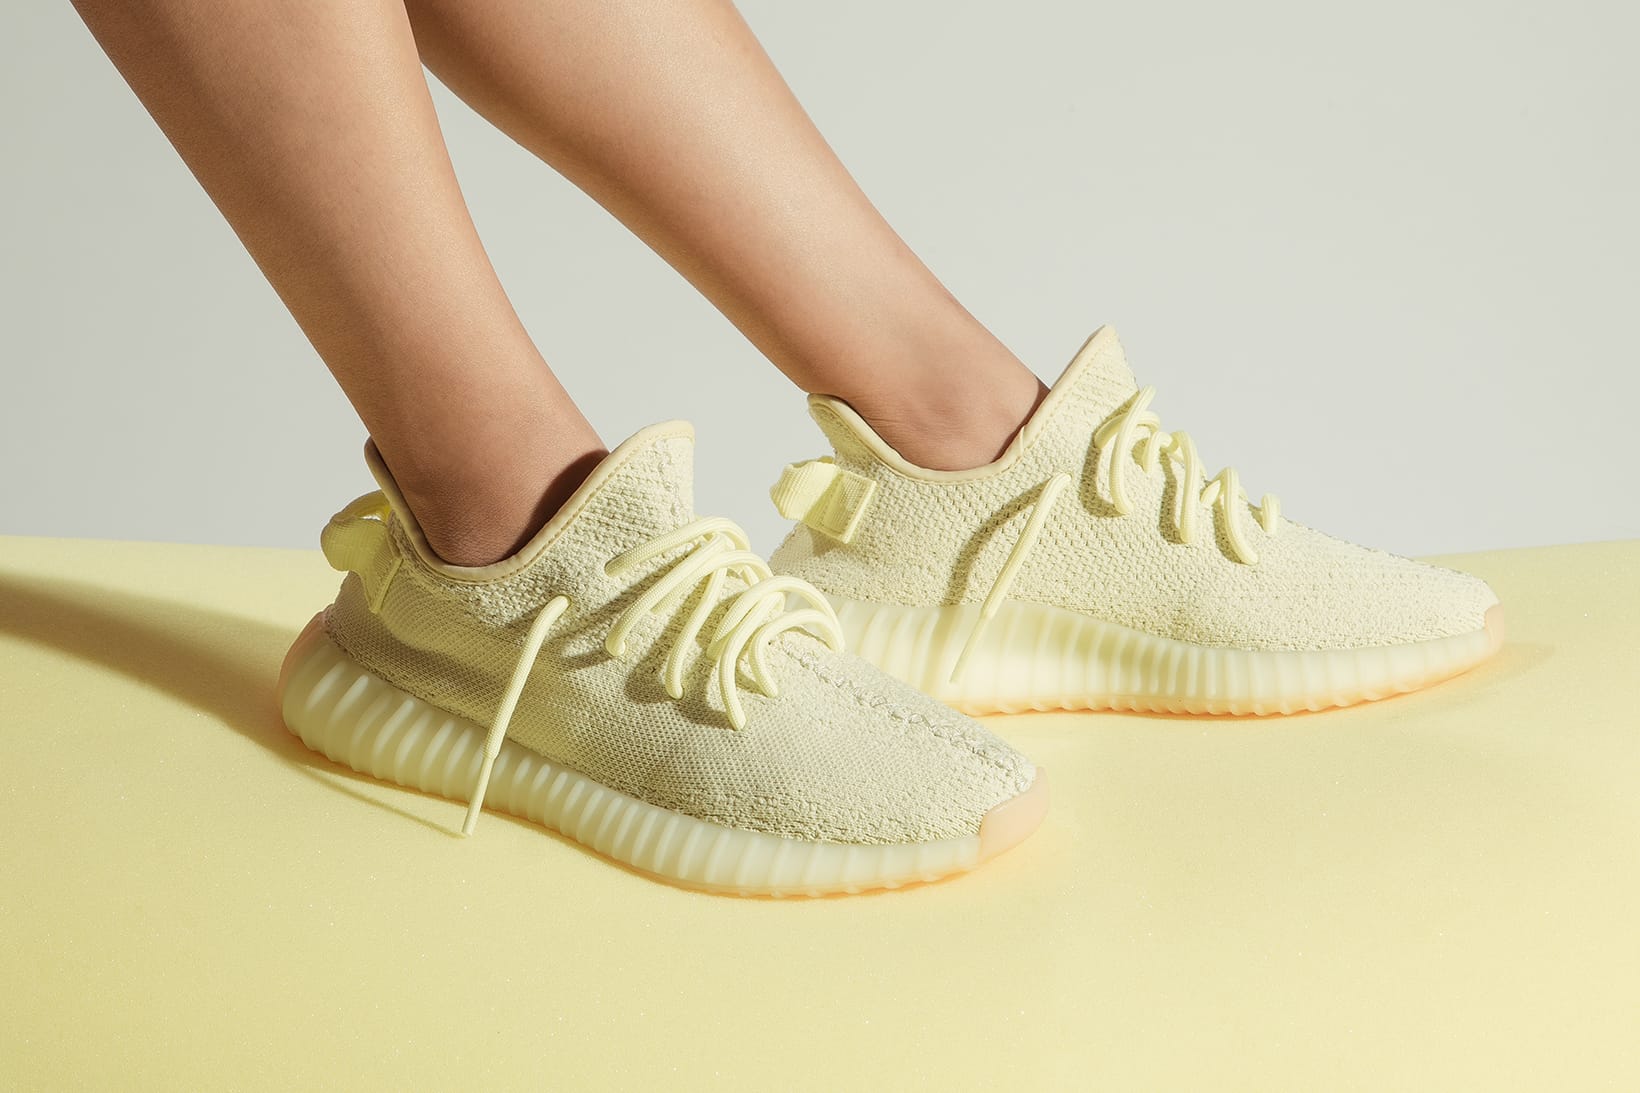 Where to buy YEEZY BOOST 350 V2 “Butter 